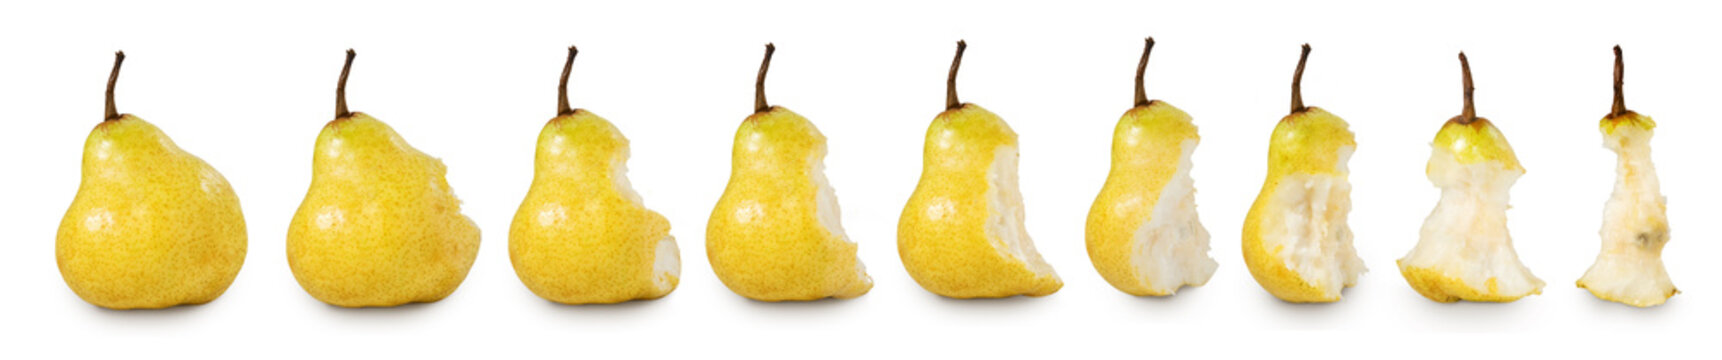 image of pears on a white background